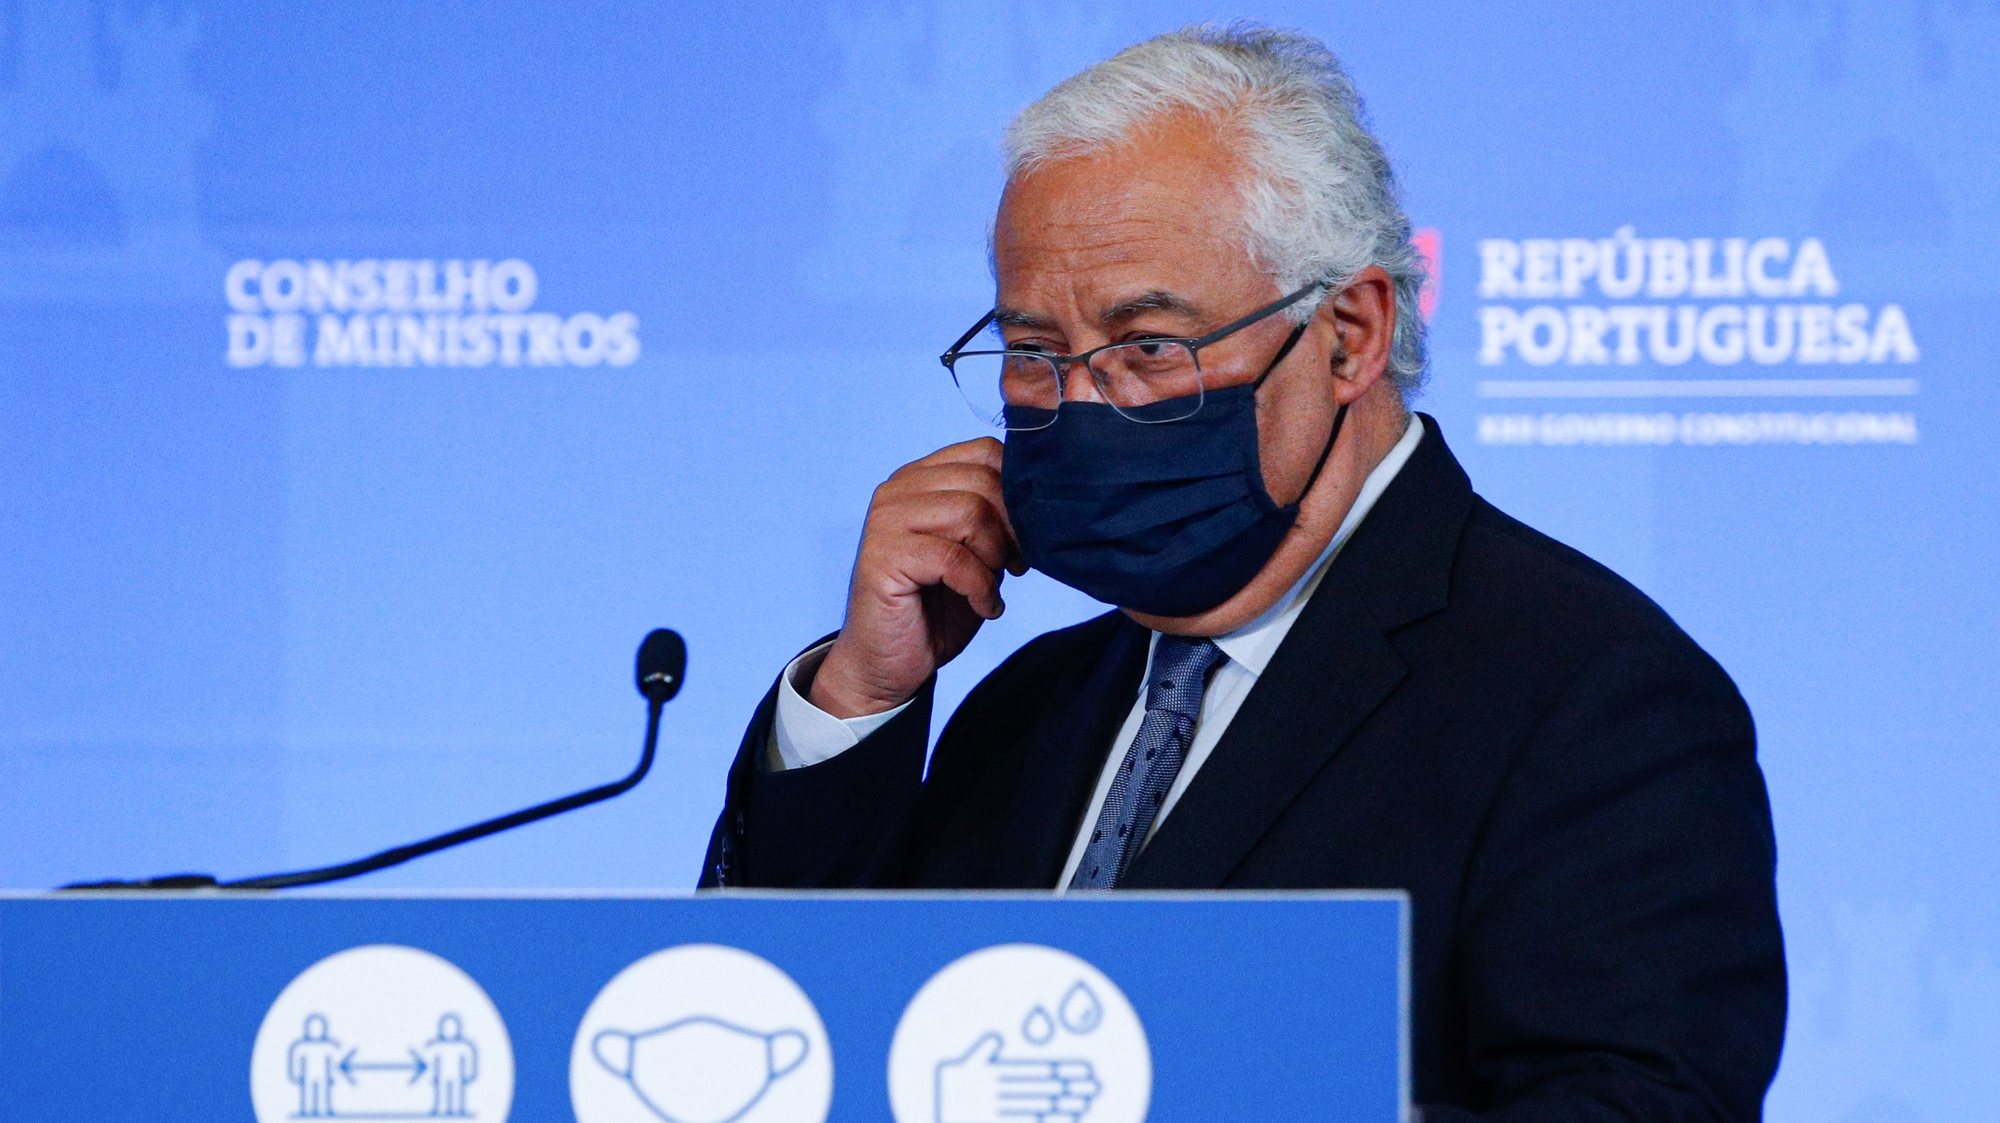 Portuguese Prime Minister, António Costa, during the briefing of the Council of Ministers Meeting, at Palácio da Ajuda, Lisbon, Portugal, March 11, 2021. António Costa announced the reopening plan measures in the context of the fight to control the covid-19 pandemic. ANTONIO COTRIM/LUSA